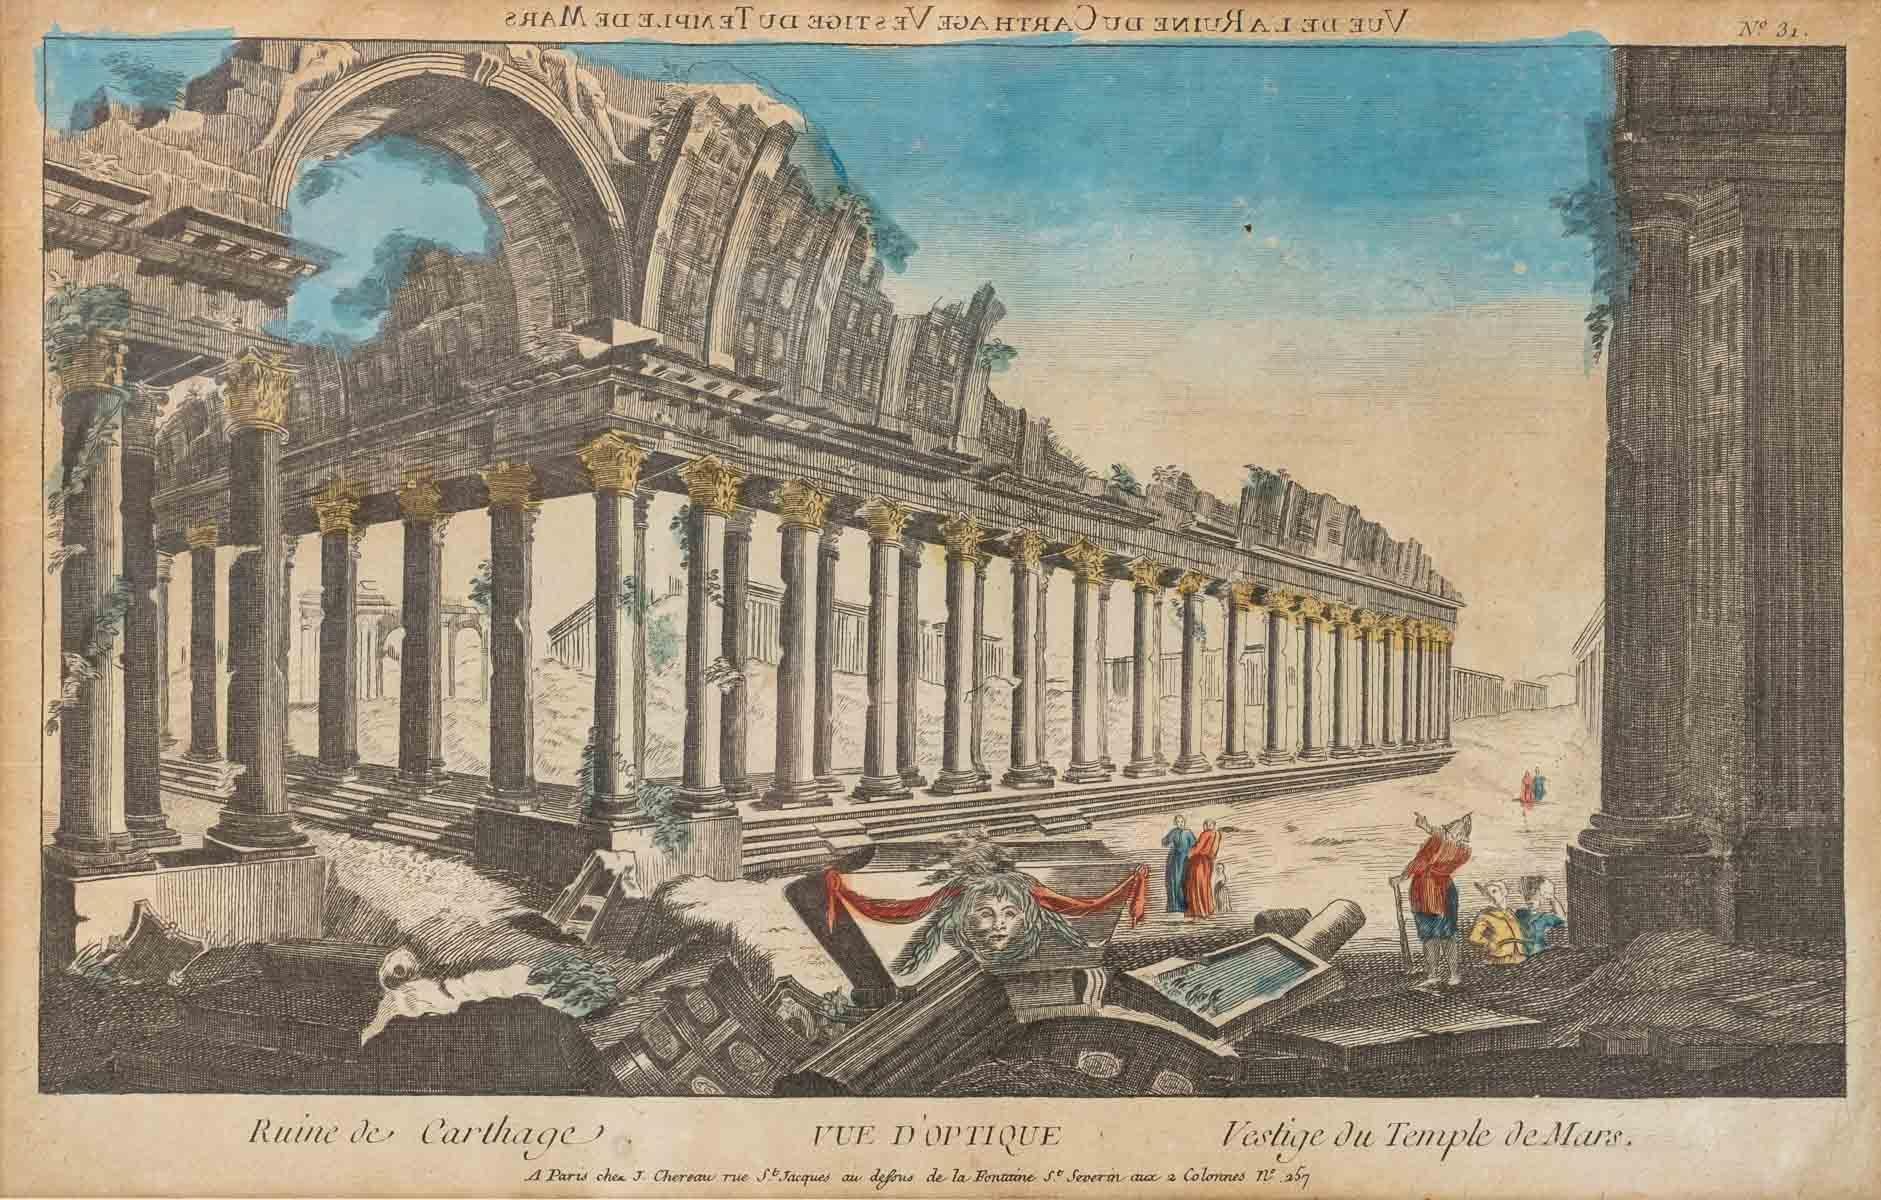 A delightful watercolour etching depicting the ruins of Carthage, remnants of the Temple of Mars.
This type of engraving was mainly produced on copper and is known as an 